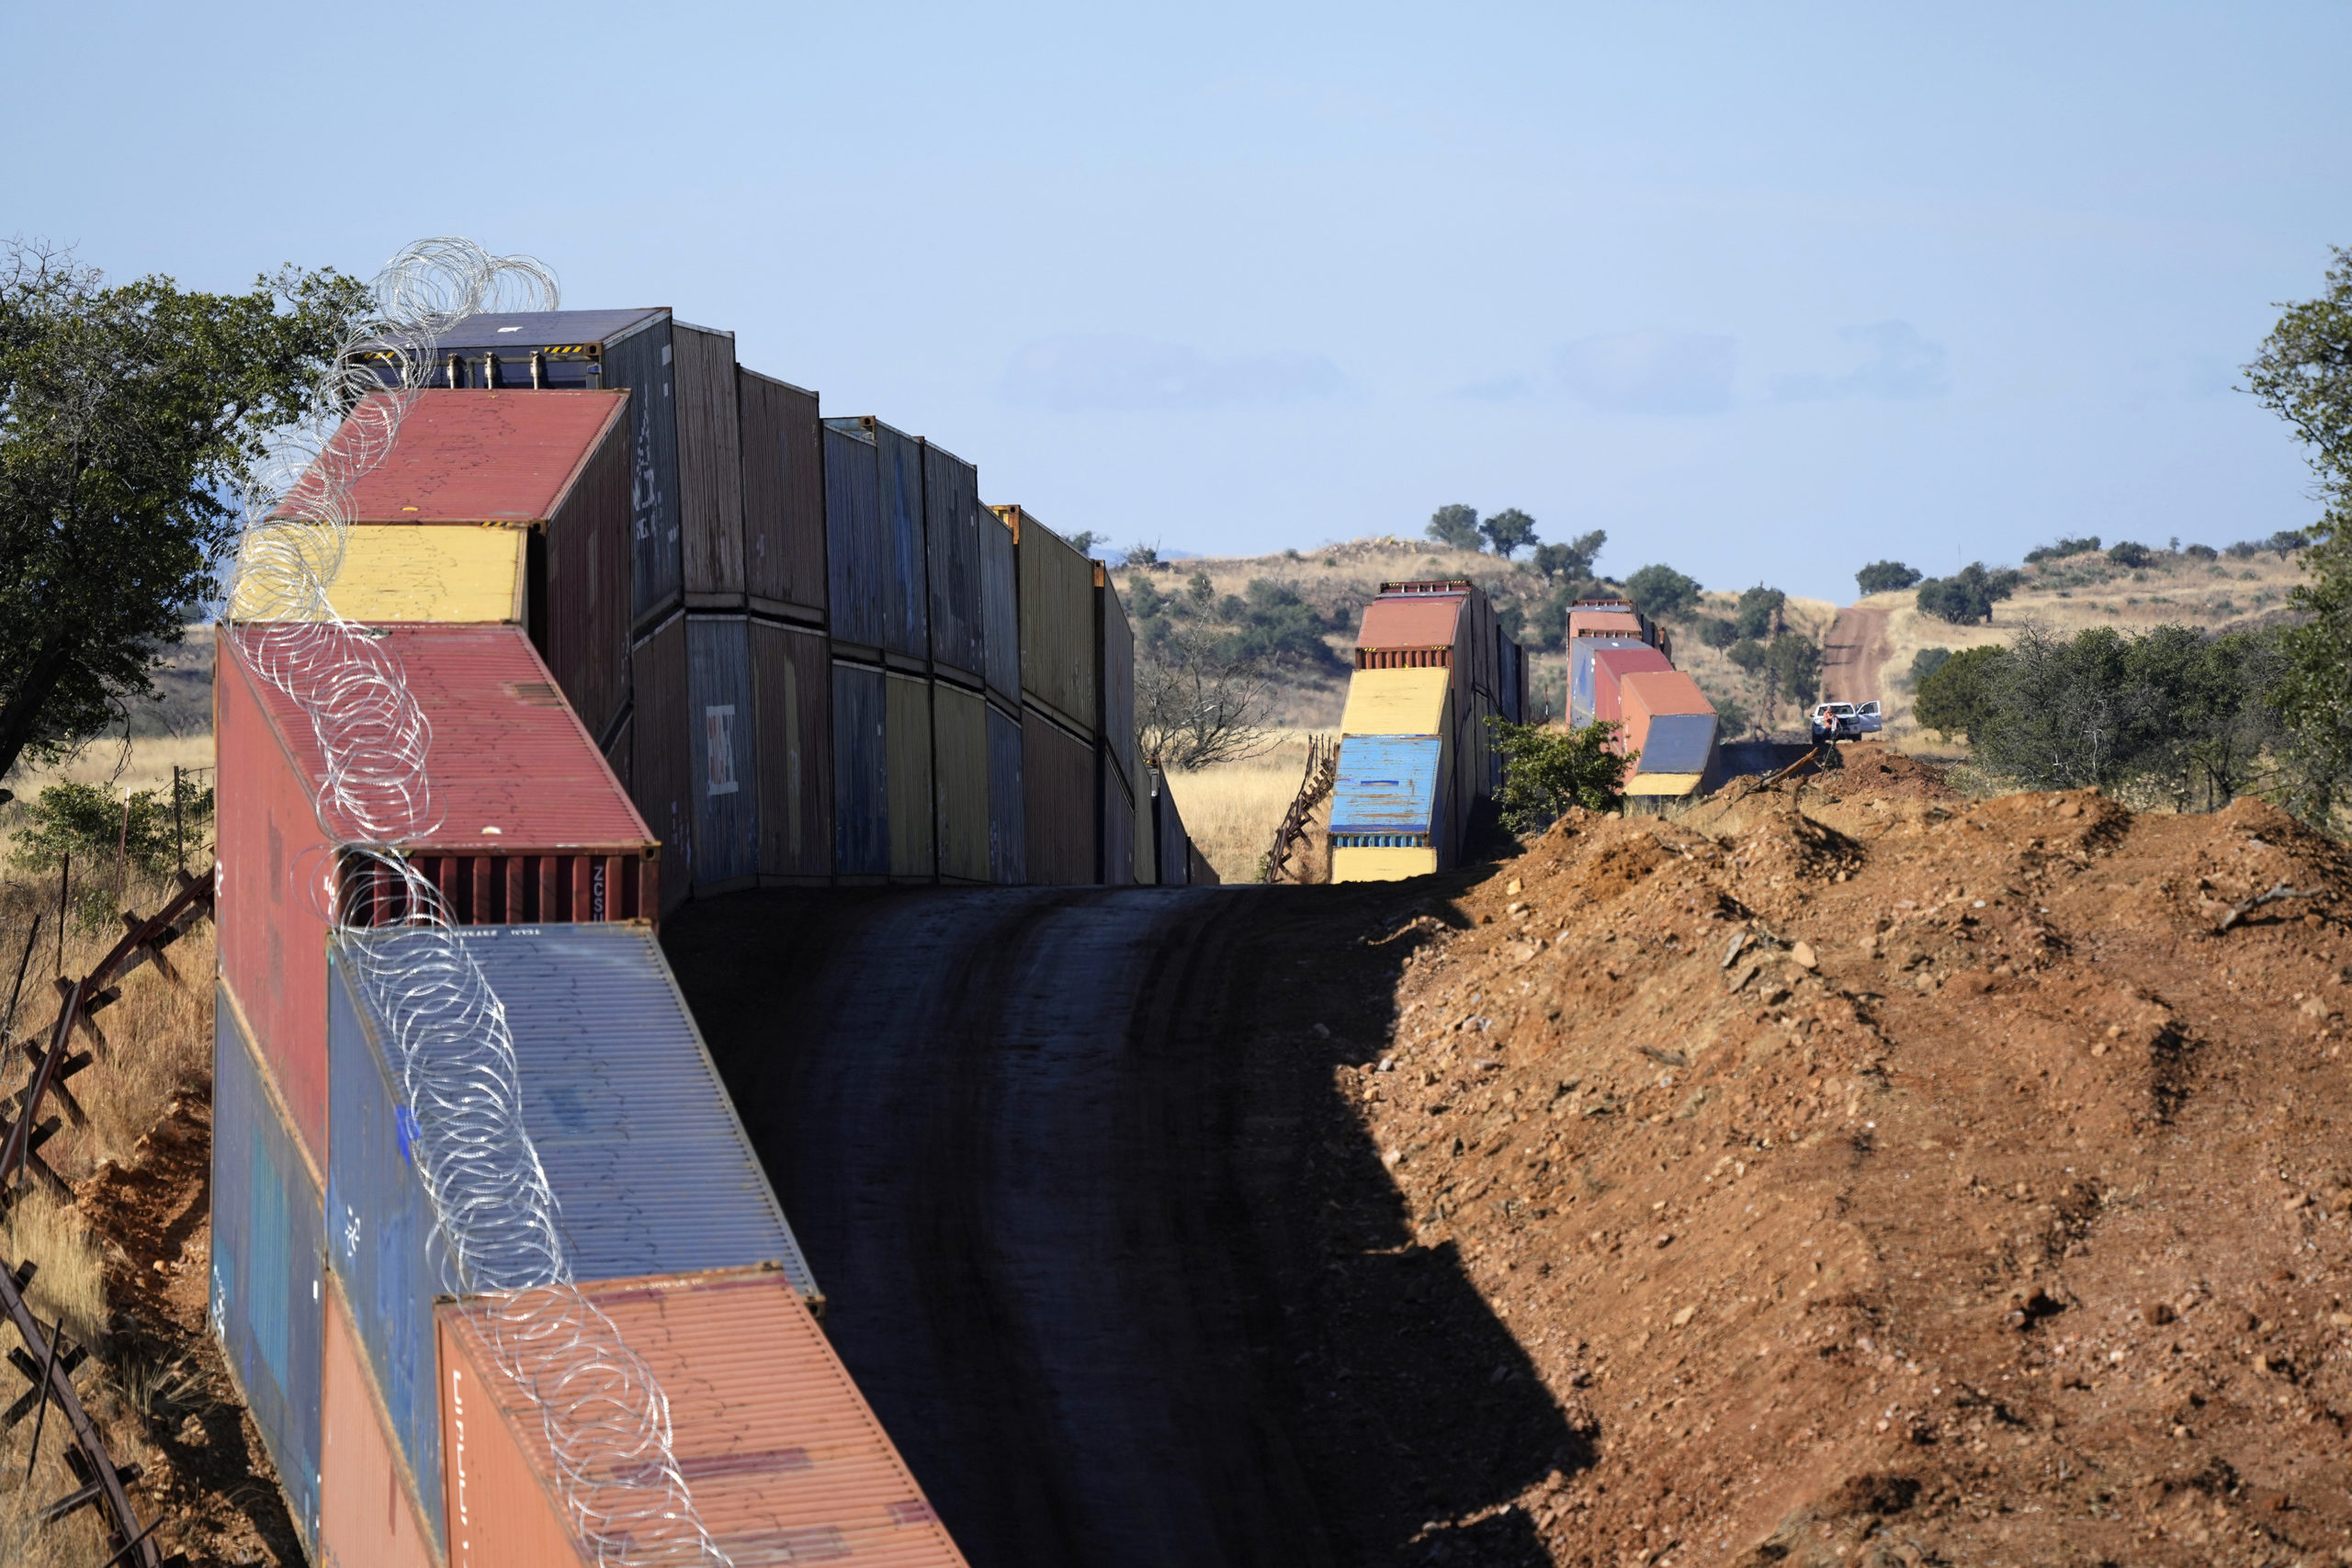 A long row of double-stacked shipping containers provide a new wall between the United States and Mexico in the remote section area of San Rafael Valley, Arizona, on Dec. 8.